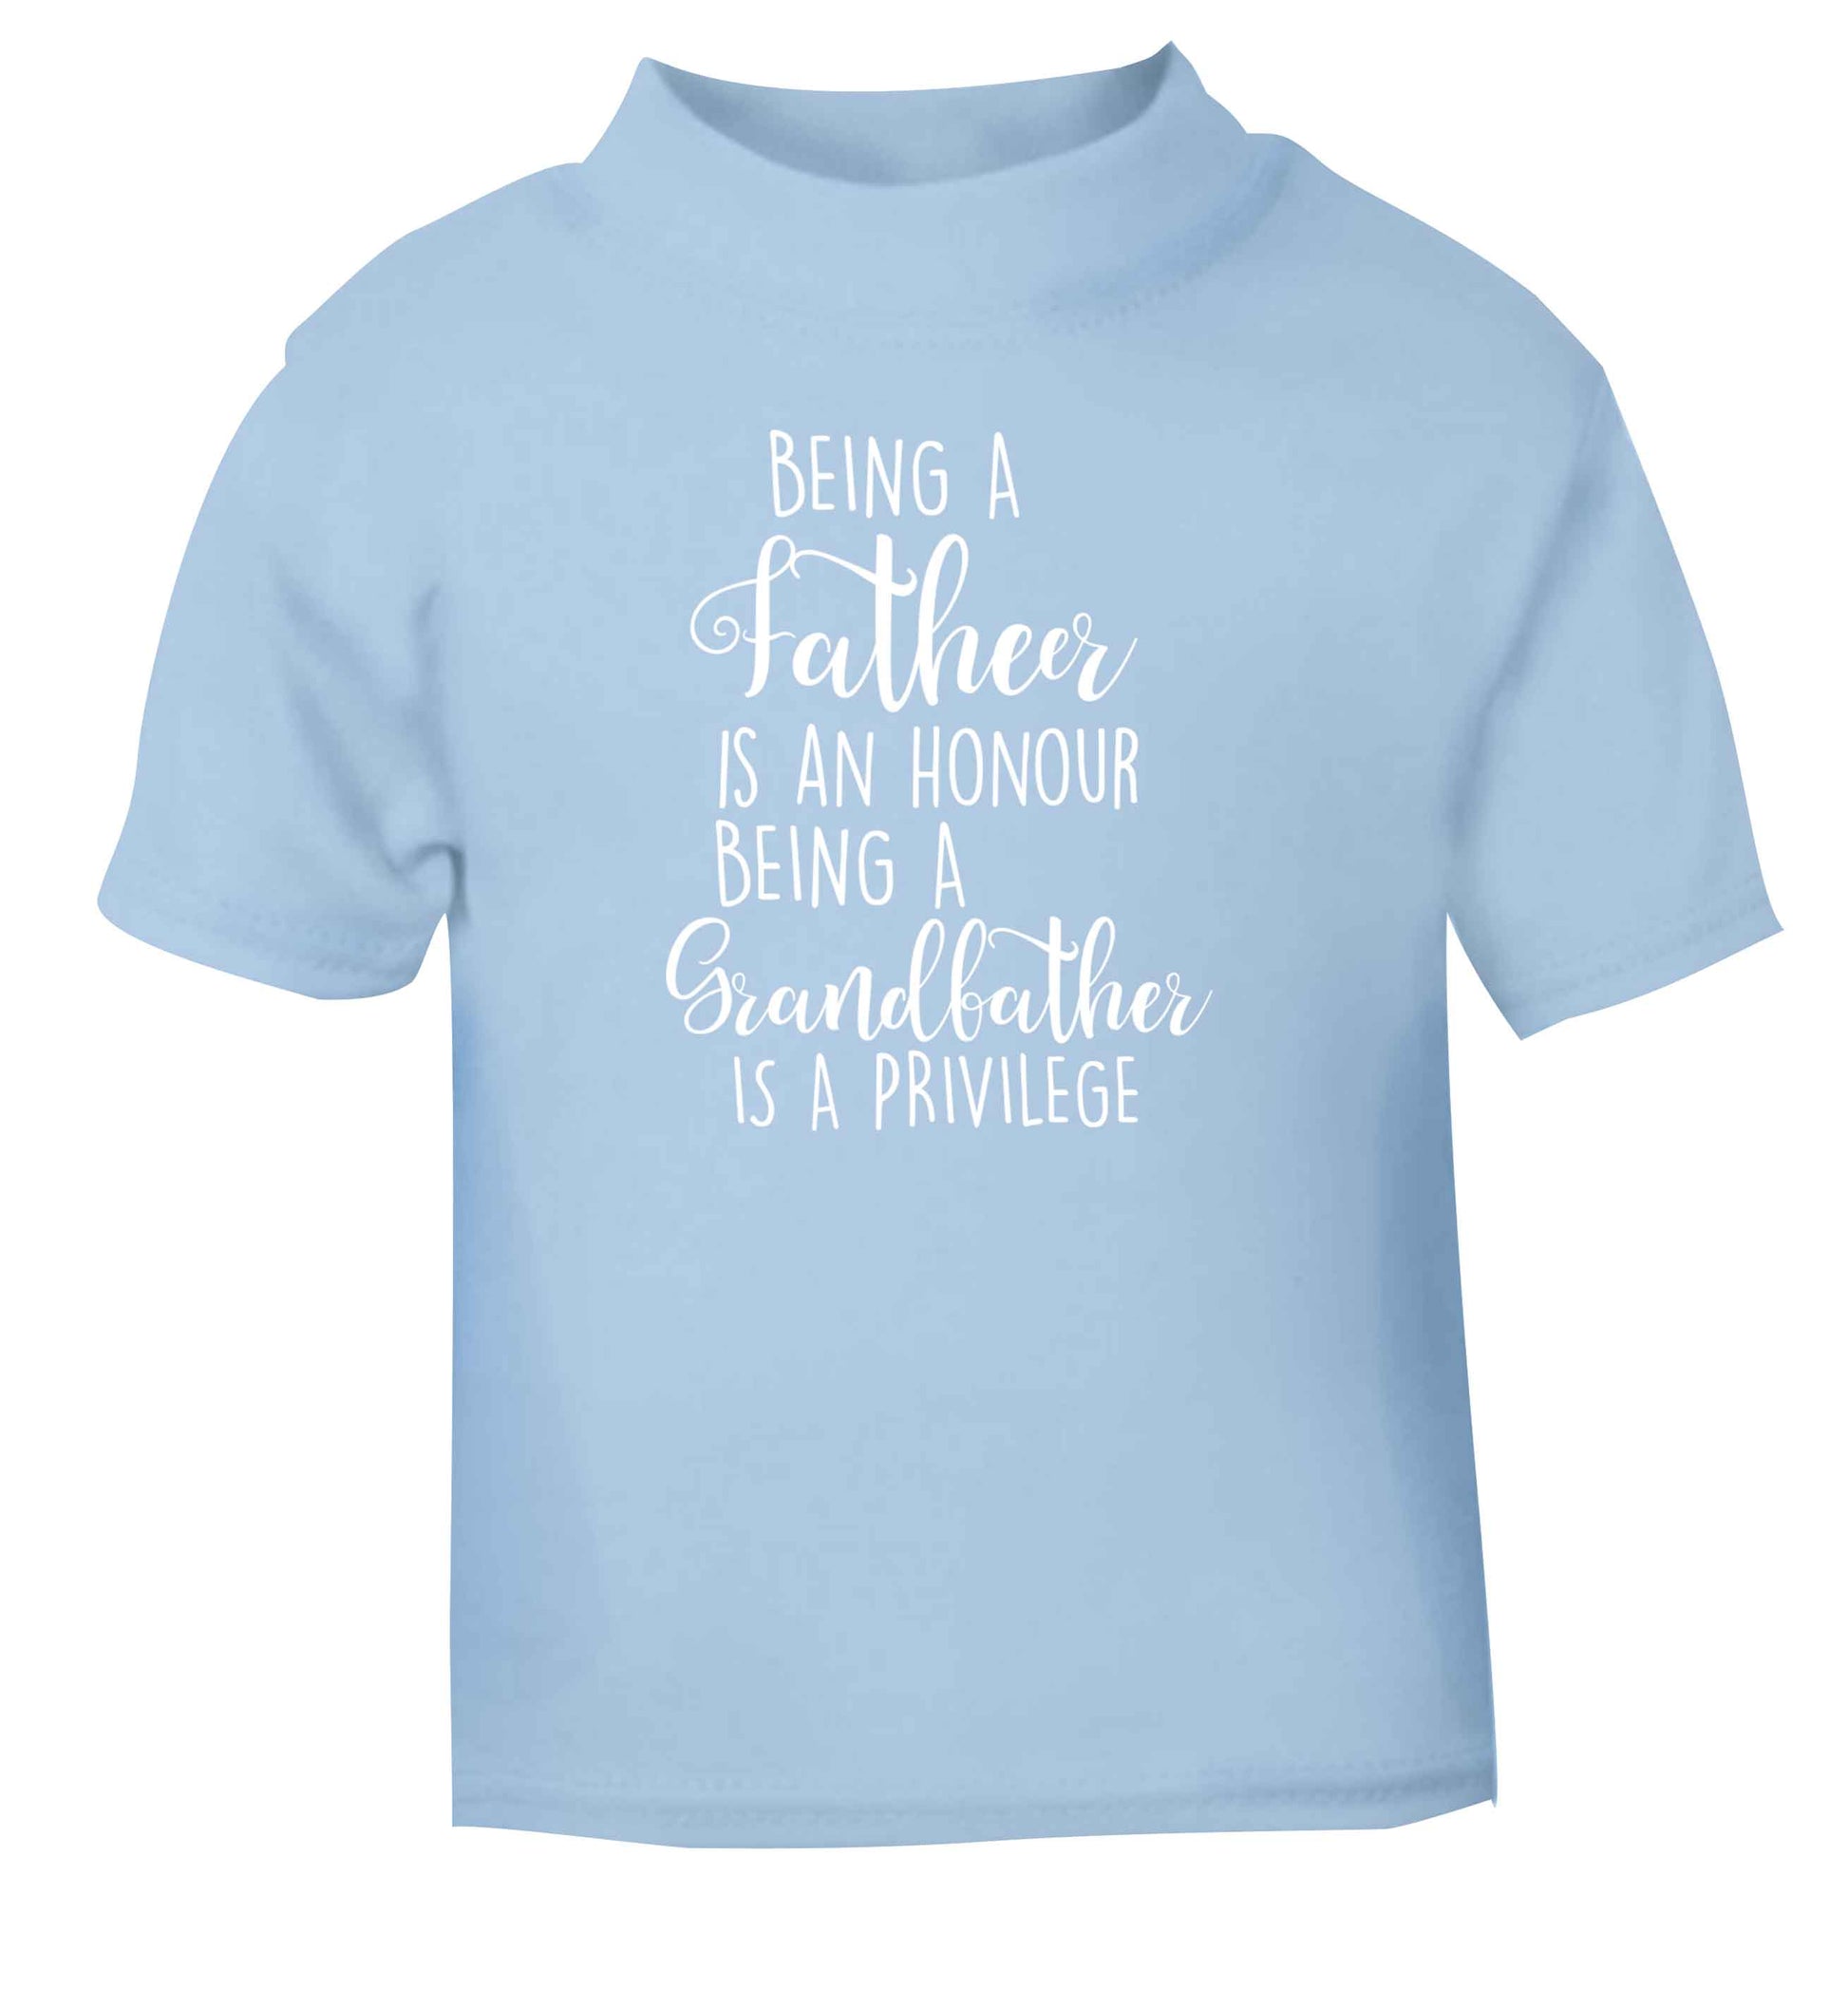 Being a father is an honour being a grandfather is a privilege light blue Baby Toddler Tshirt 2 Years